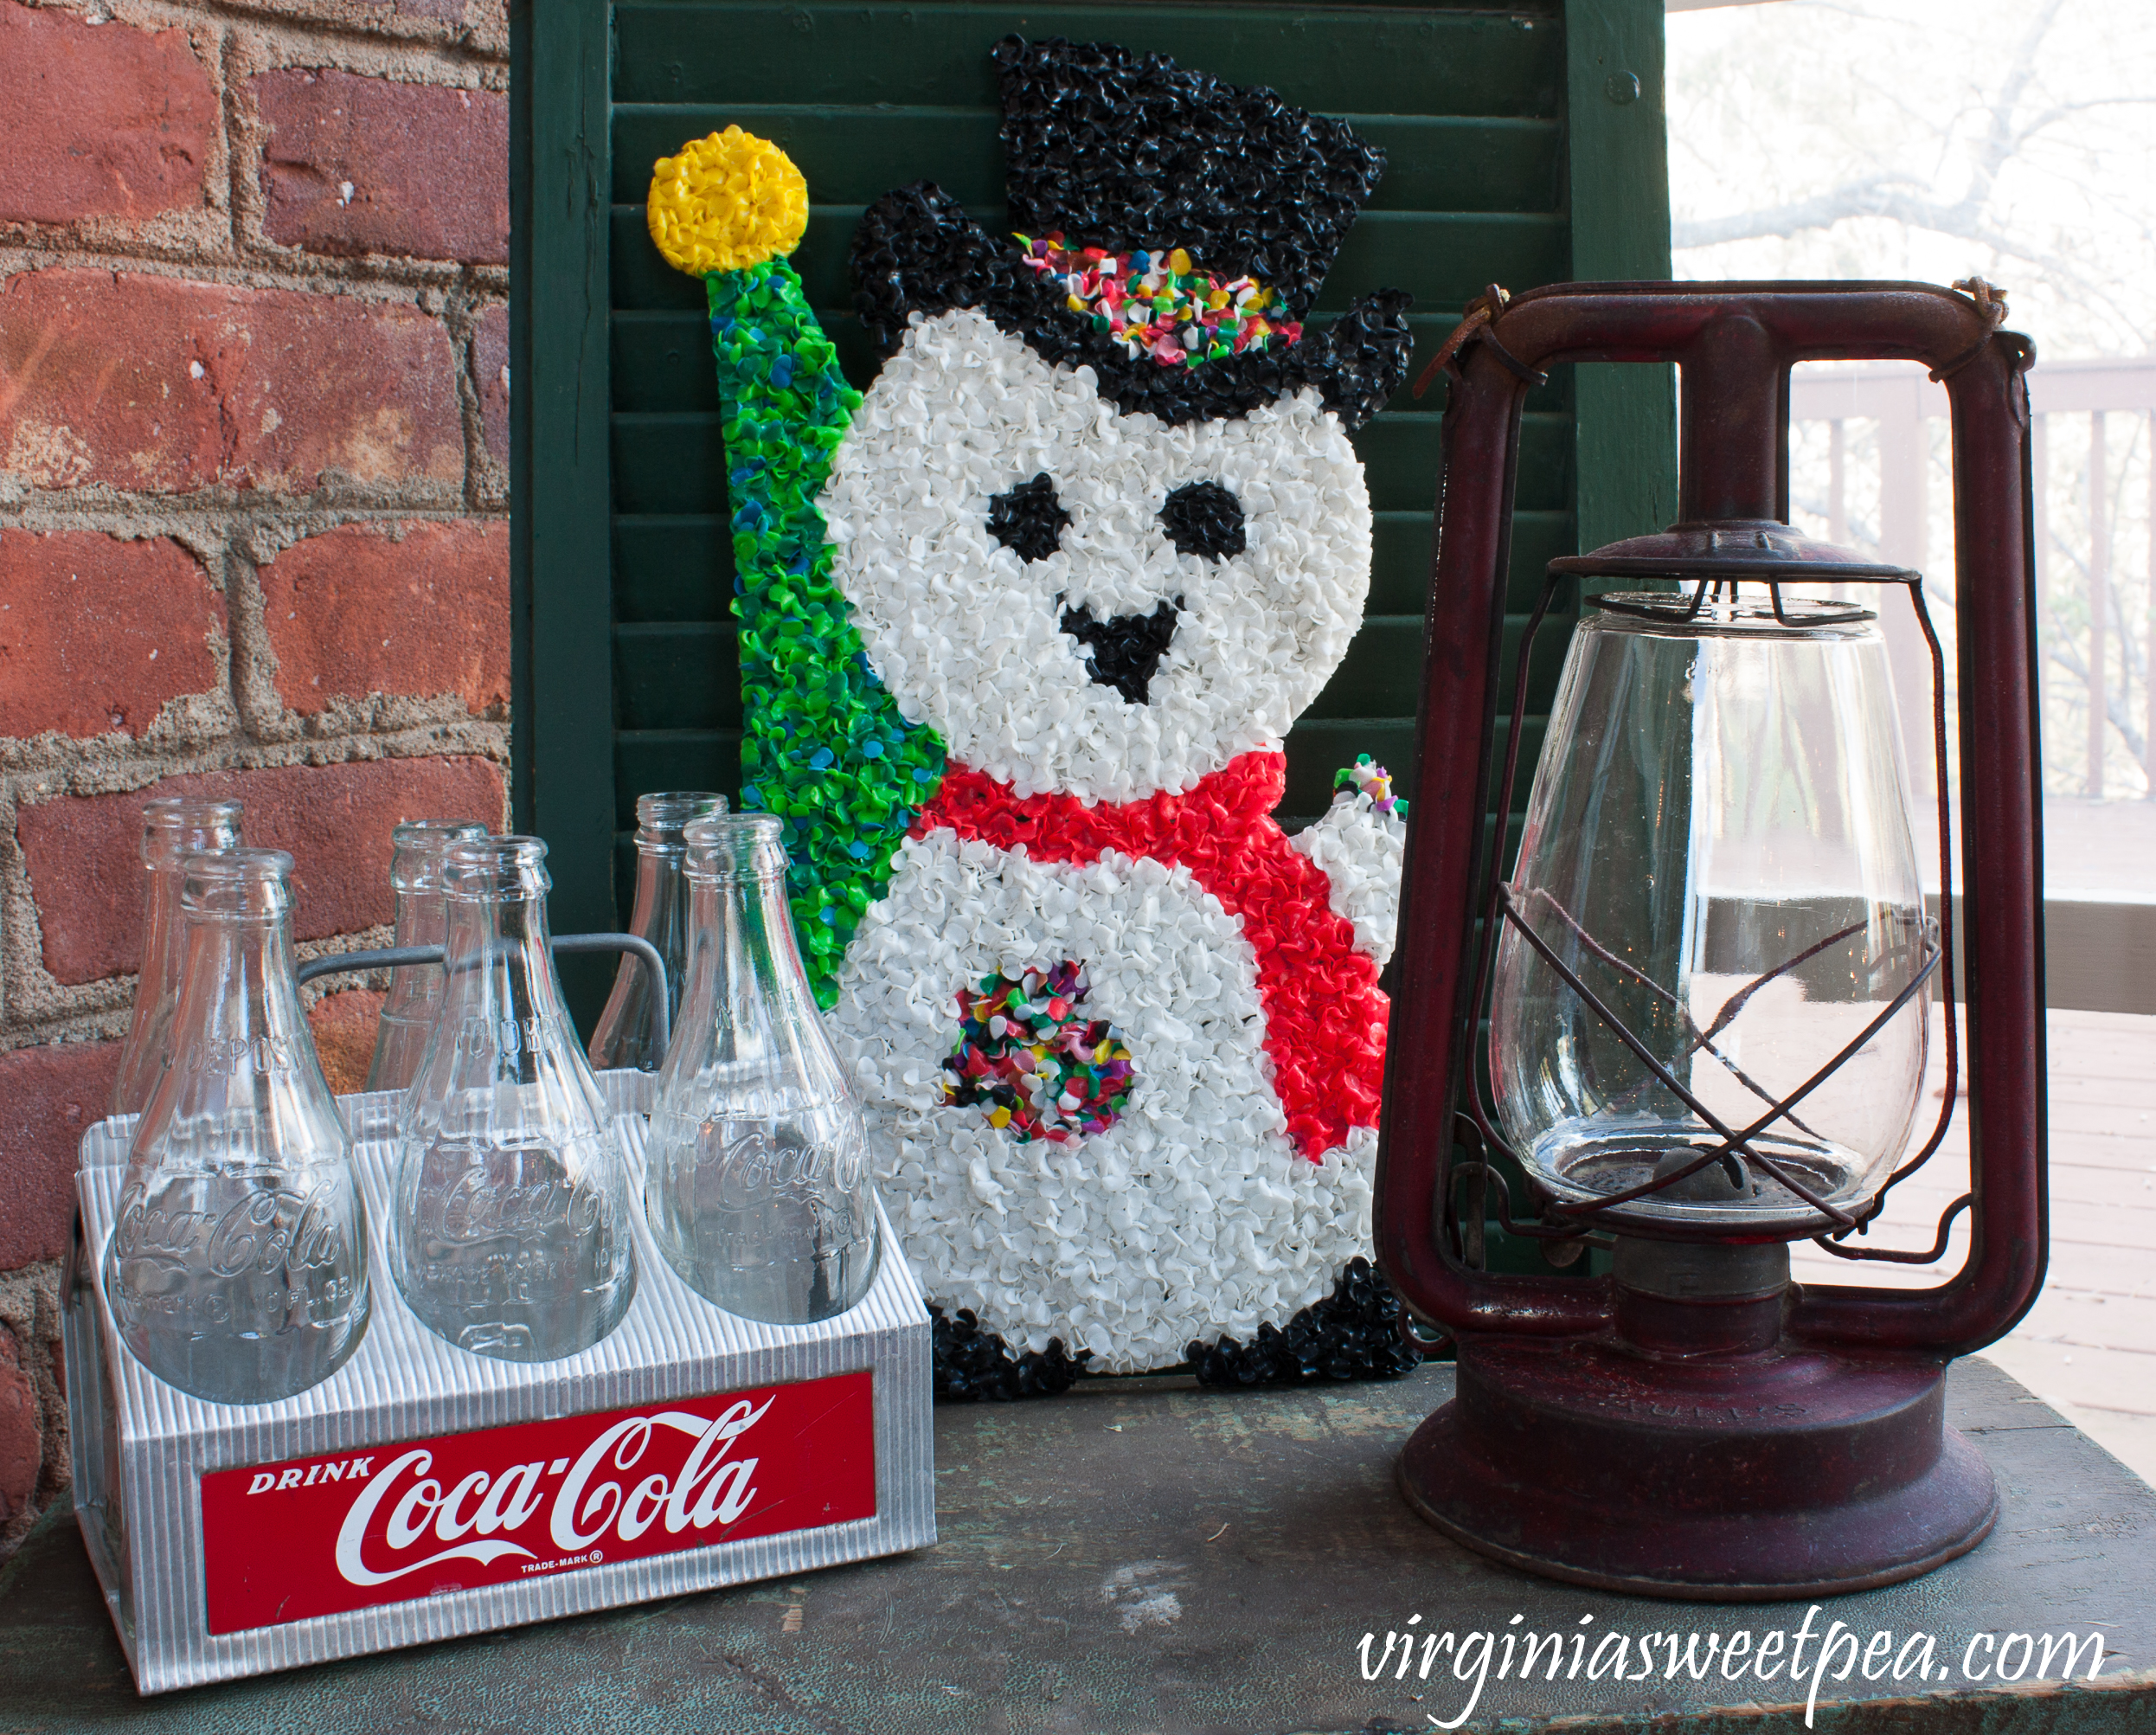 Vintage Christmas Vignette - A Coke caddy, 1970's plastic snowman door decor, and an antique lantern are displayed on a an antique tool chest. #christmas #christmasdecorations #christmastree #christmasporch #vintagechristmas #cocacola